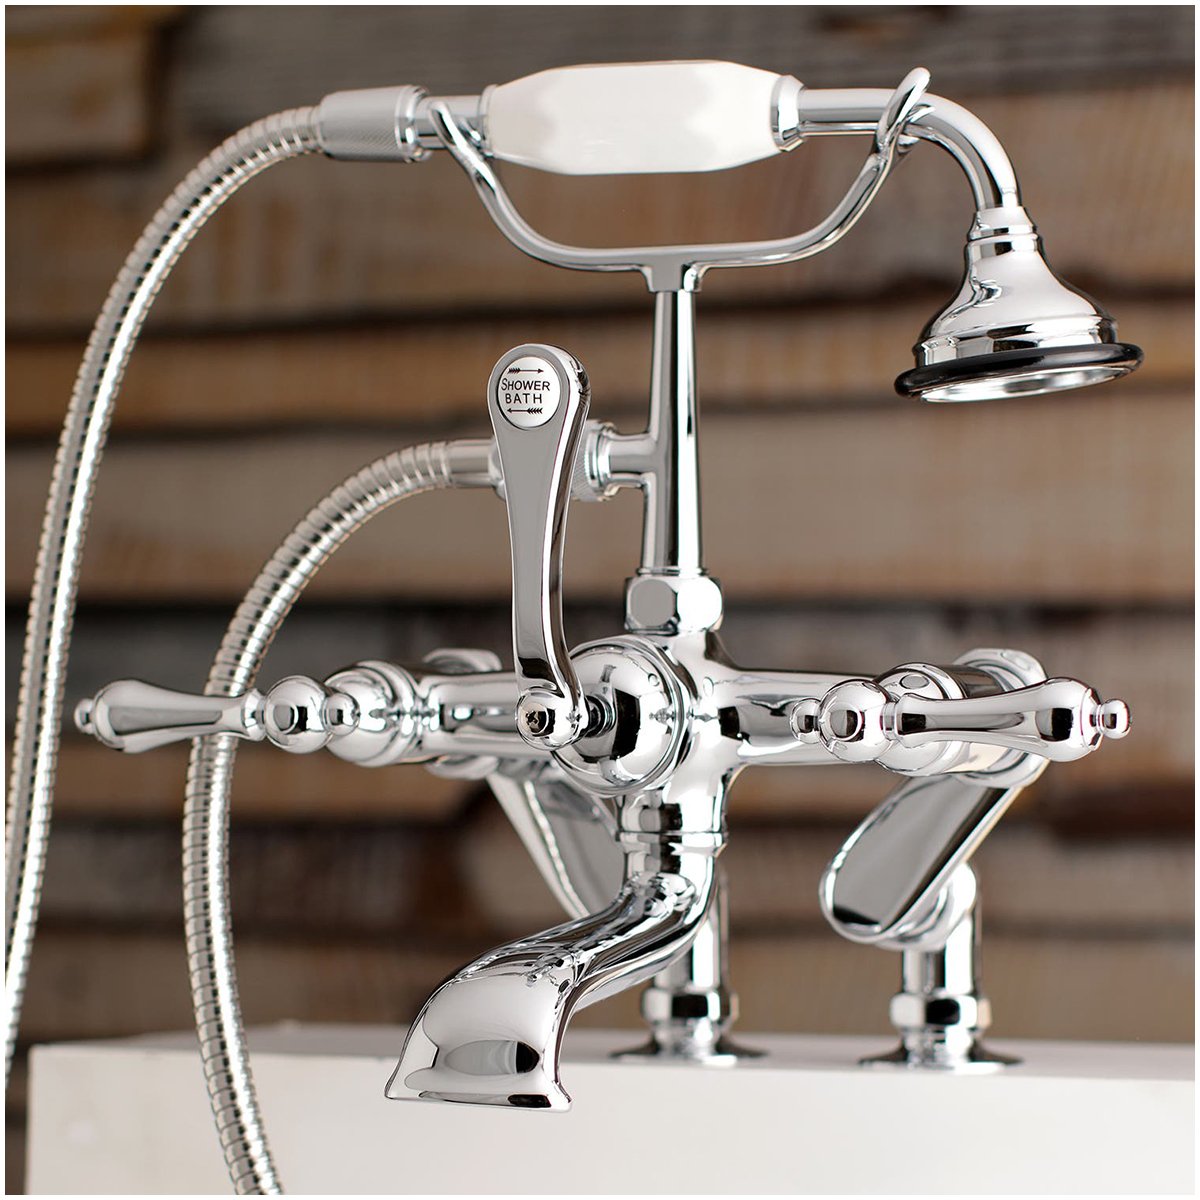 Kingston Brass Aqua Vintage 7-Inch Adjustable Clawfoot Tub Faucet with Hand Shower